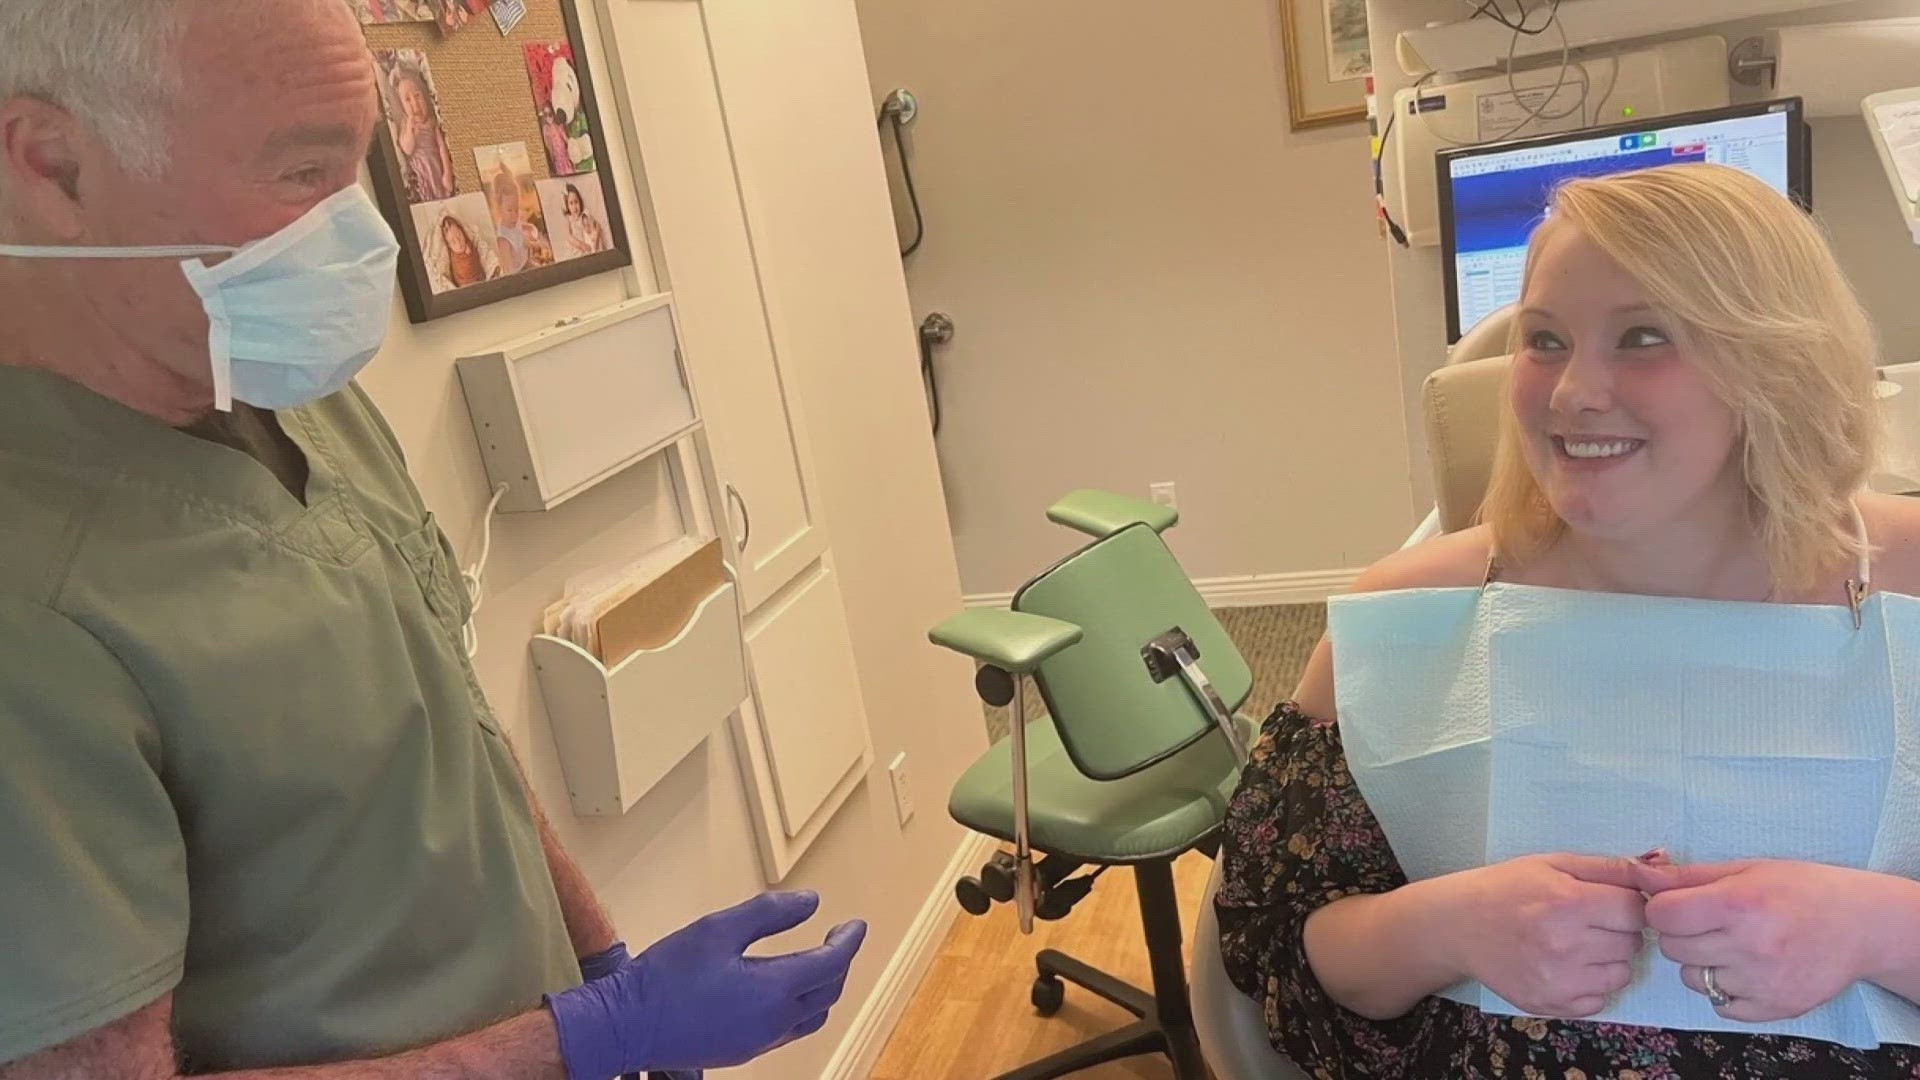 Finding Our Smiles provides women and children, victims of domestic violence with free dental procedures.